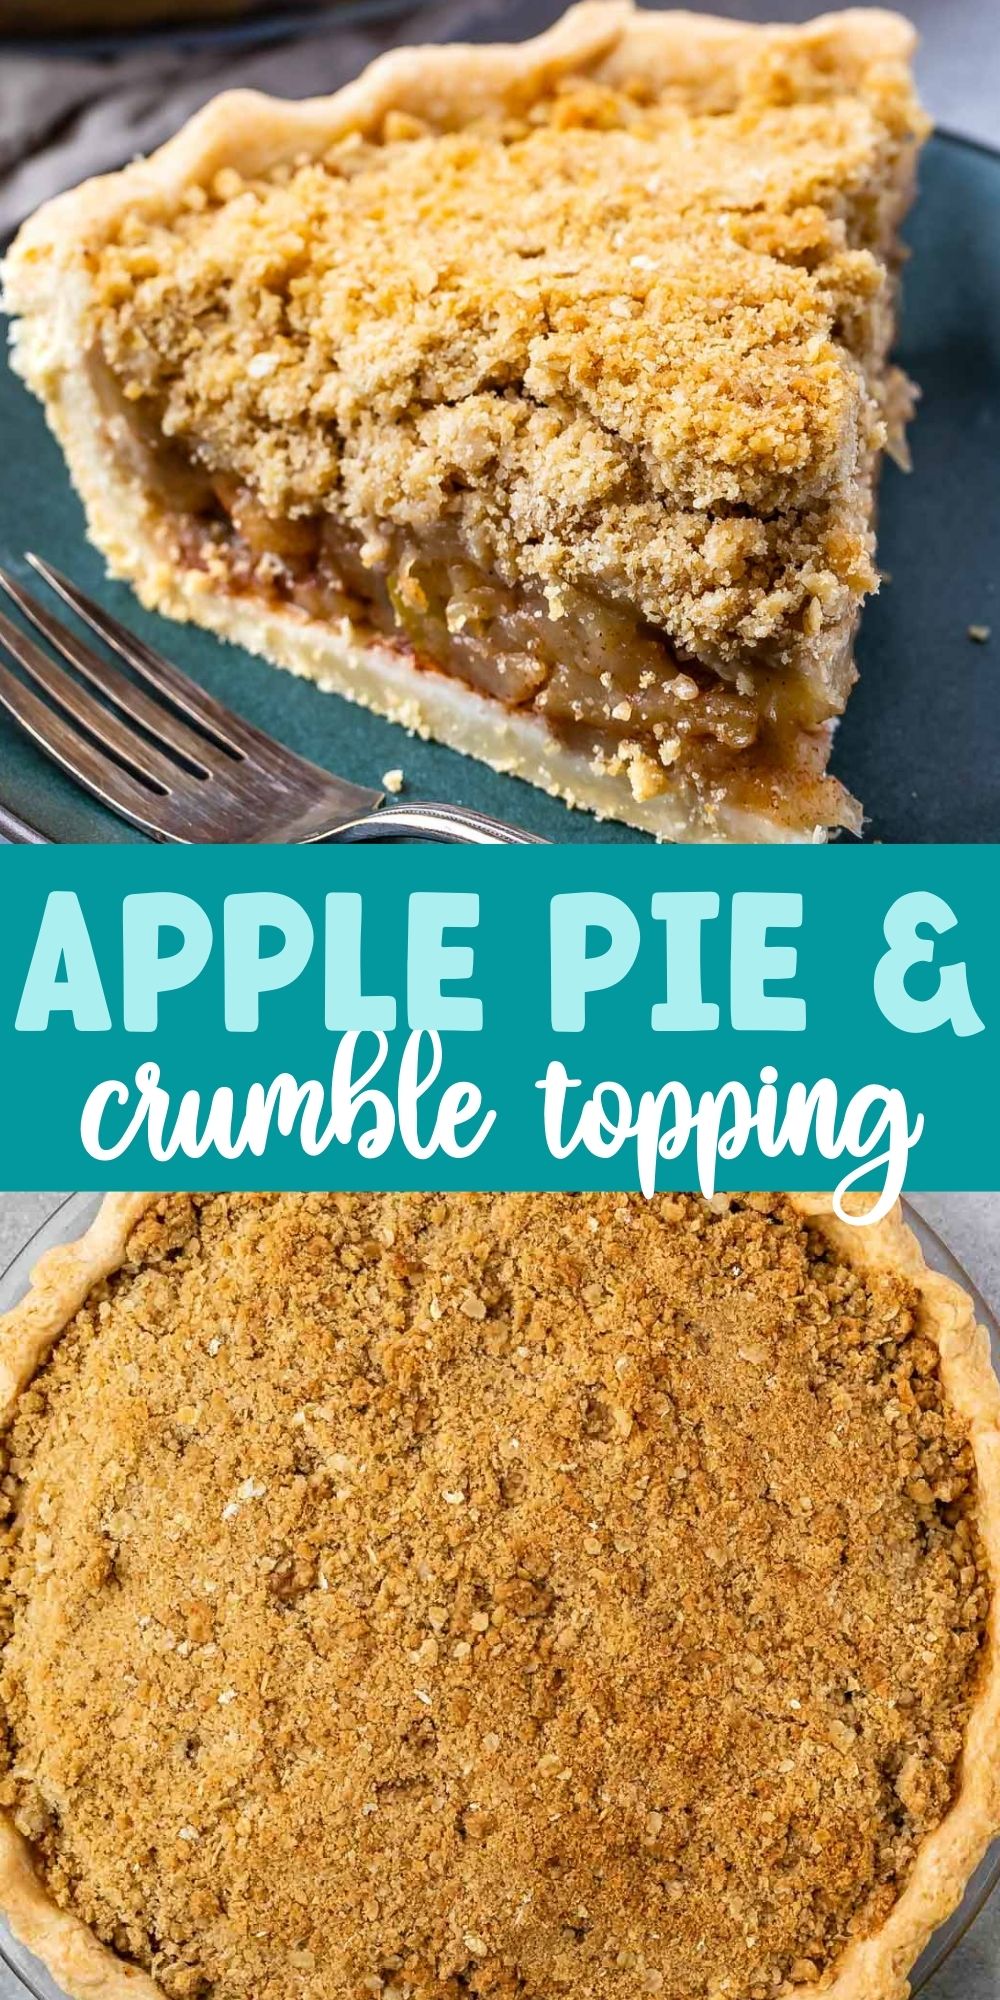 two photos of apple pie with one being a full pie and the other being just a slice and there is words in the middle of the two photos